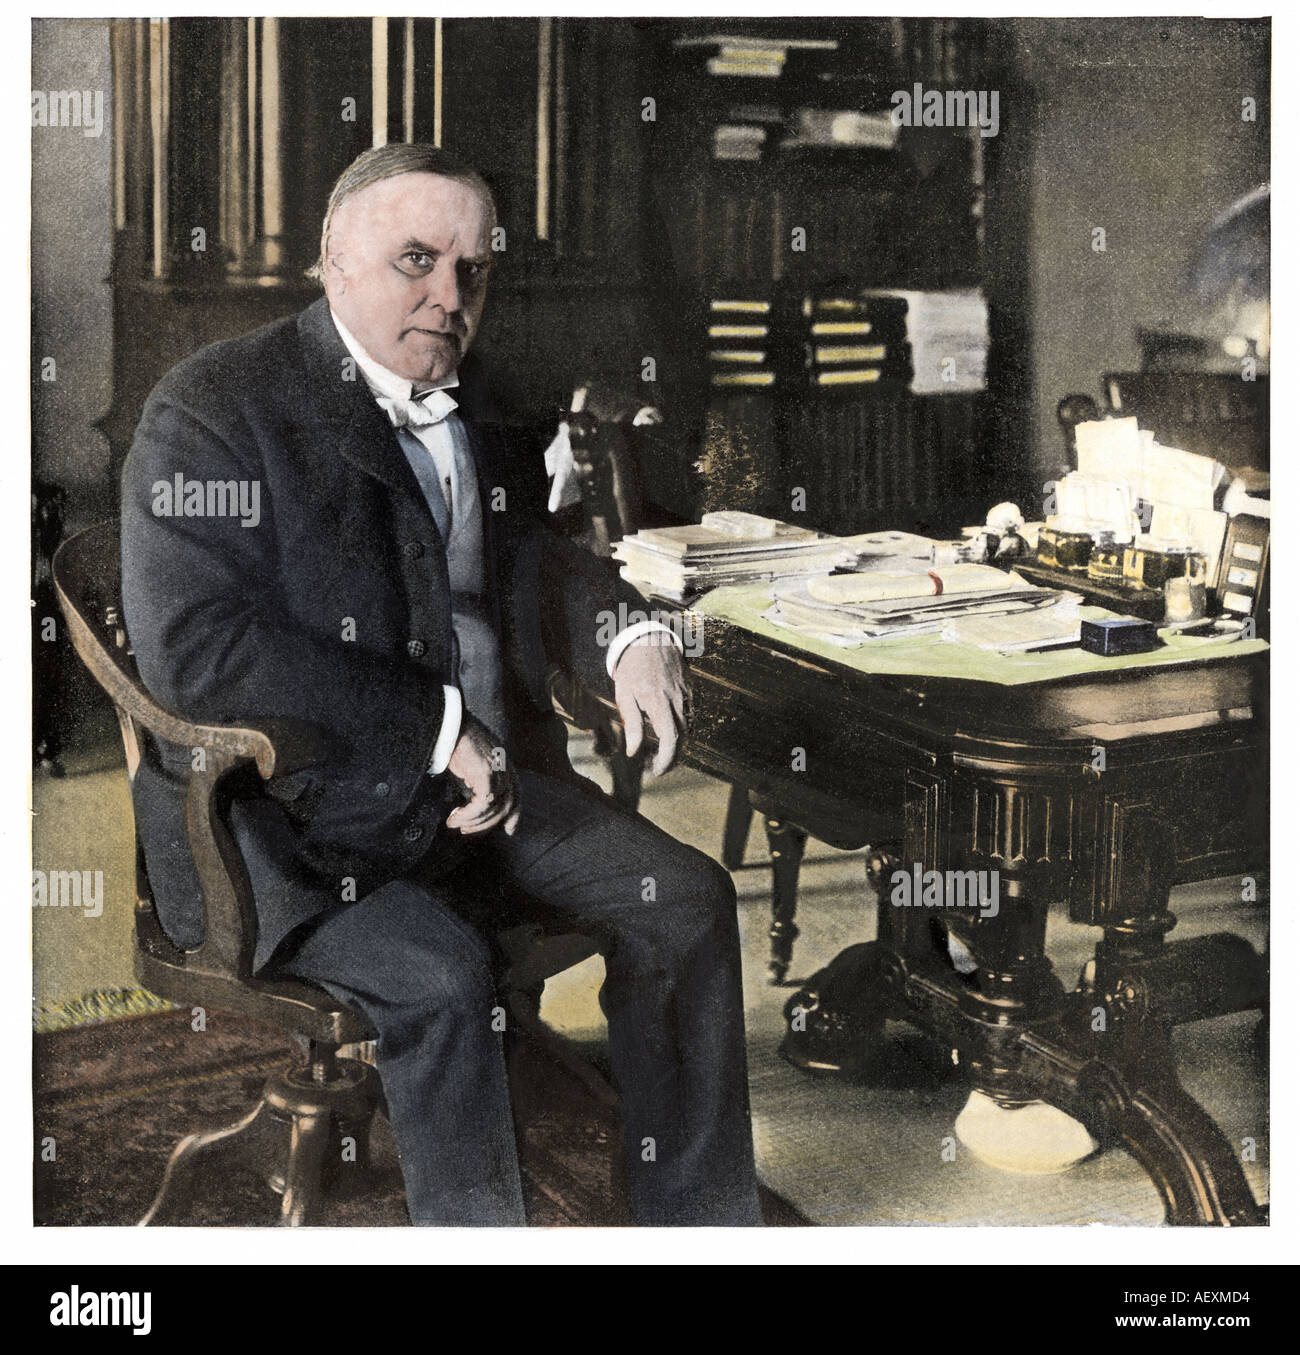 US President William McKinley at his desk from a photograph taken June 7 1898. Hand-colored halftone of a photograph Stock Photo